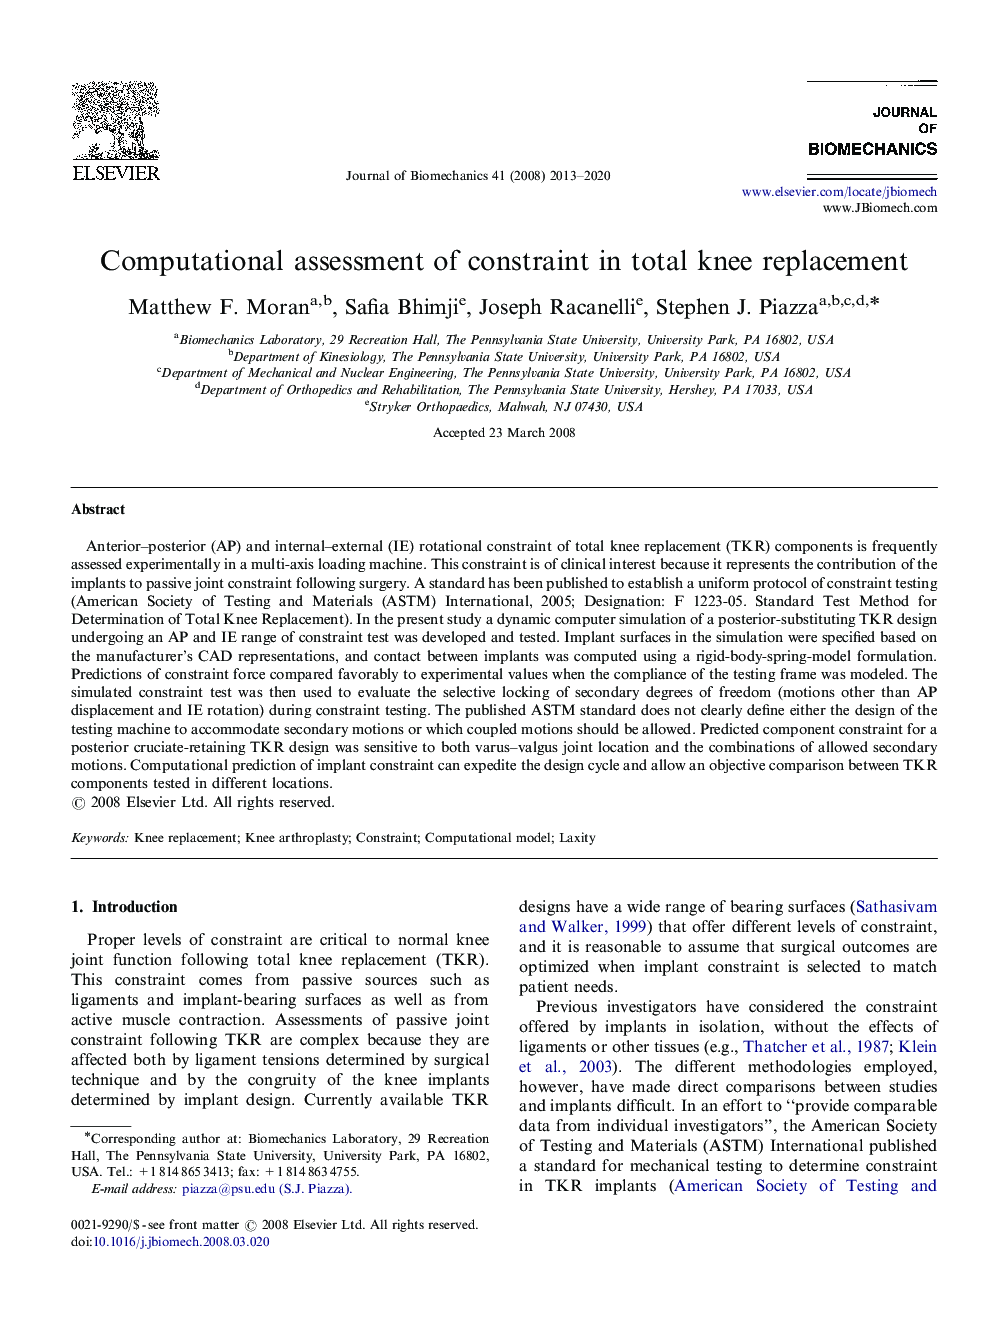 Computational assessment of constraint in total knee replacement